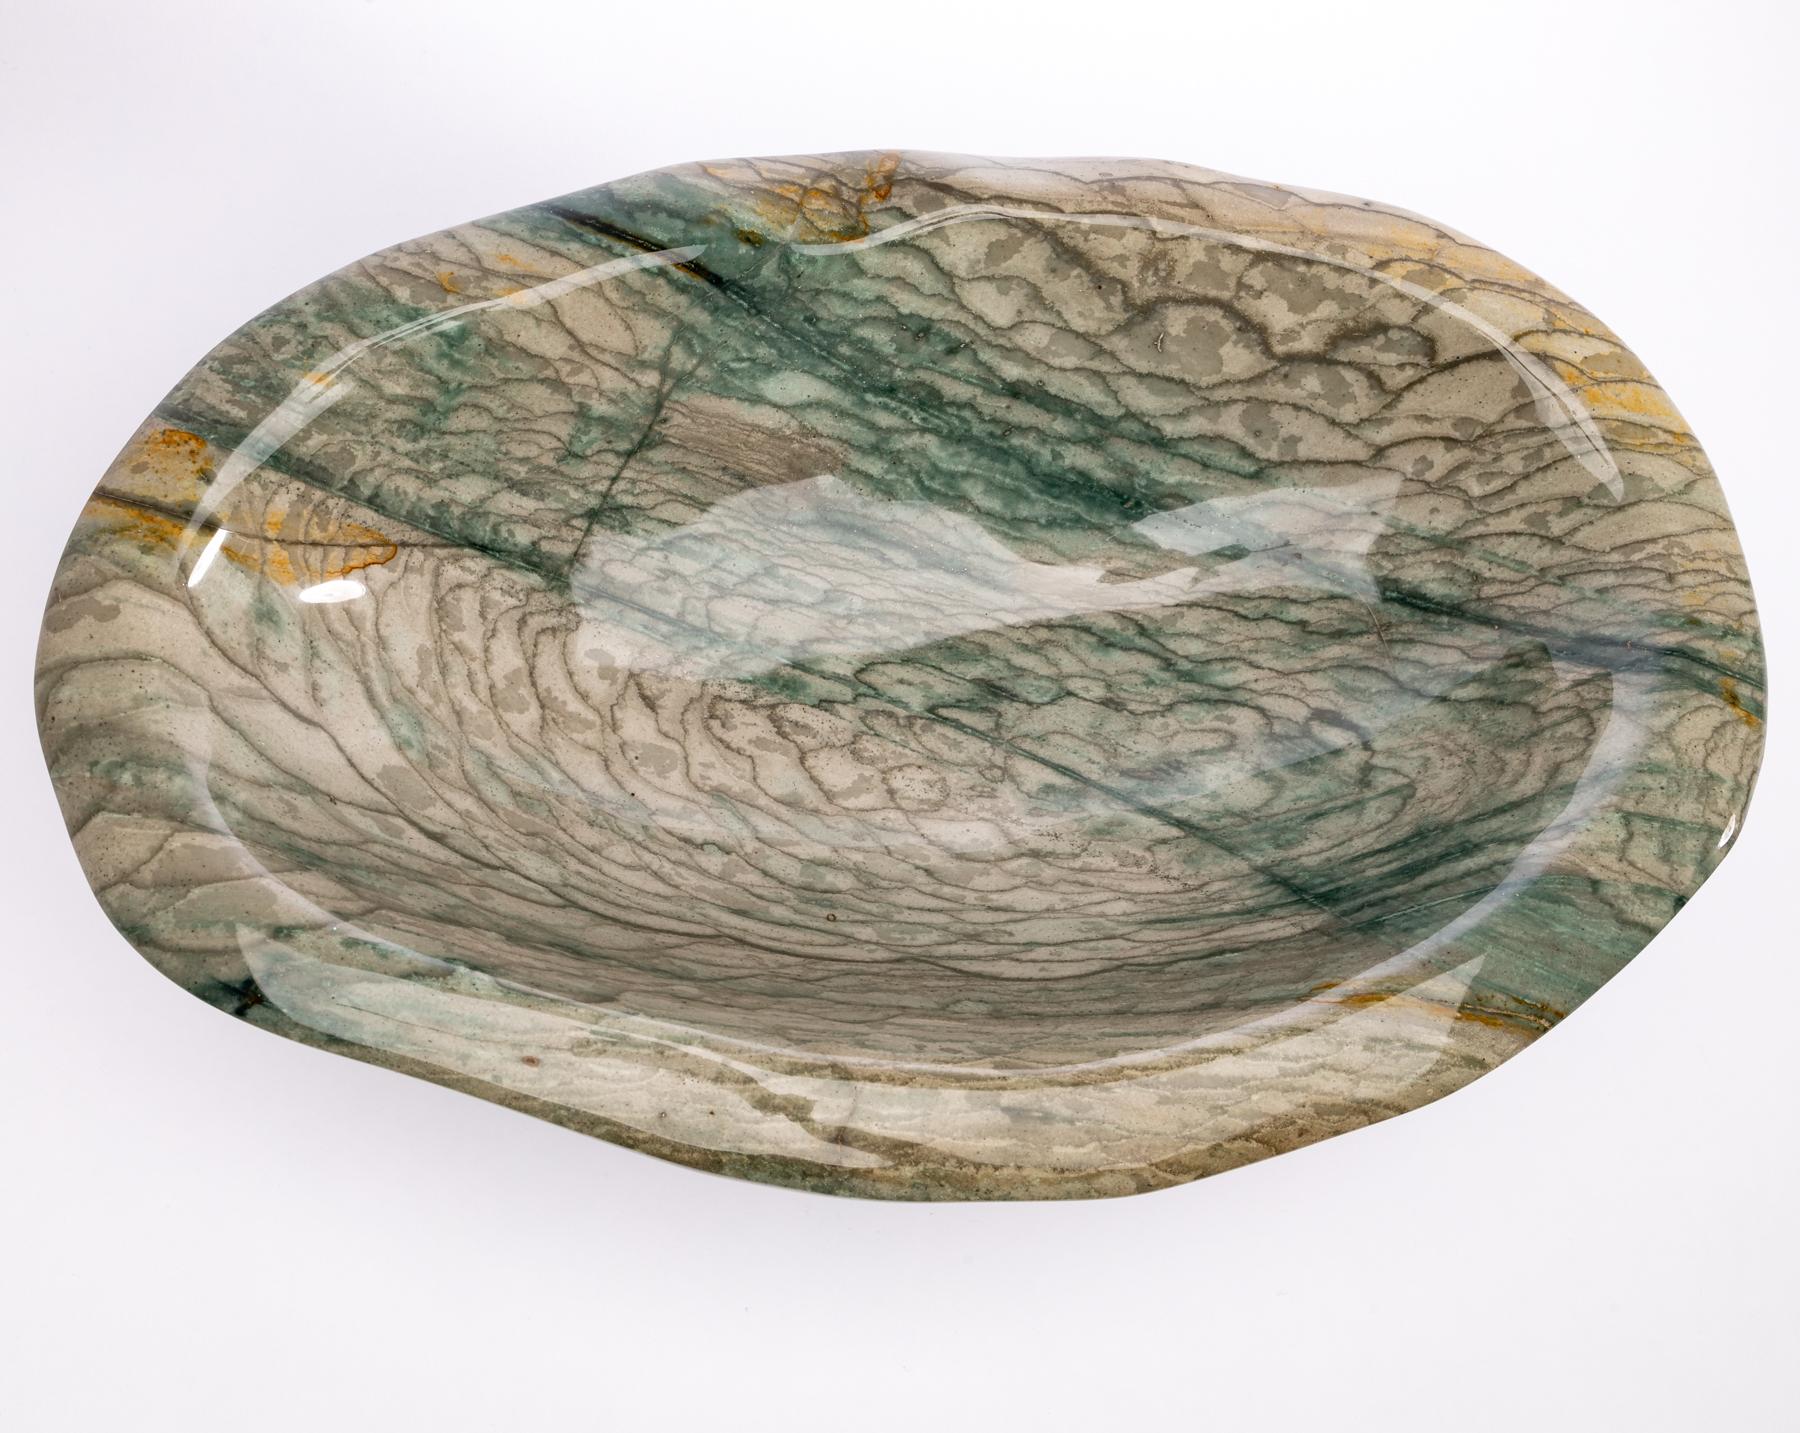 Quartz Large Green and White Shade Jasper Handcrafted Bowl from Madagascar